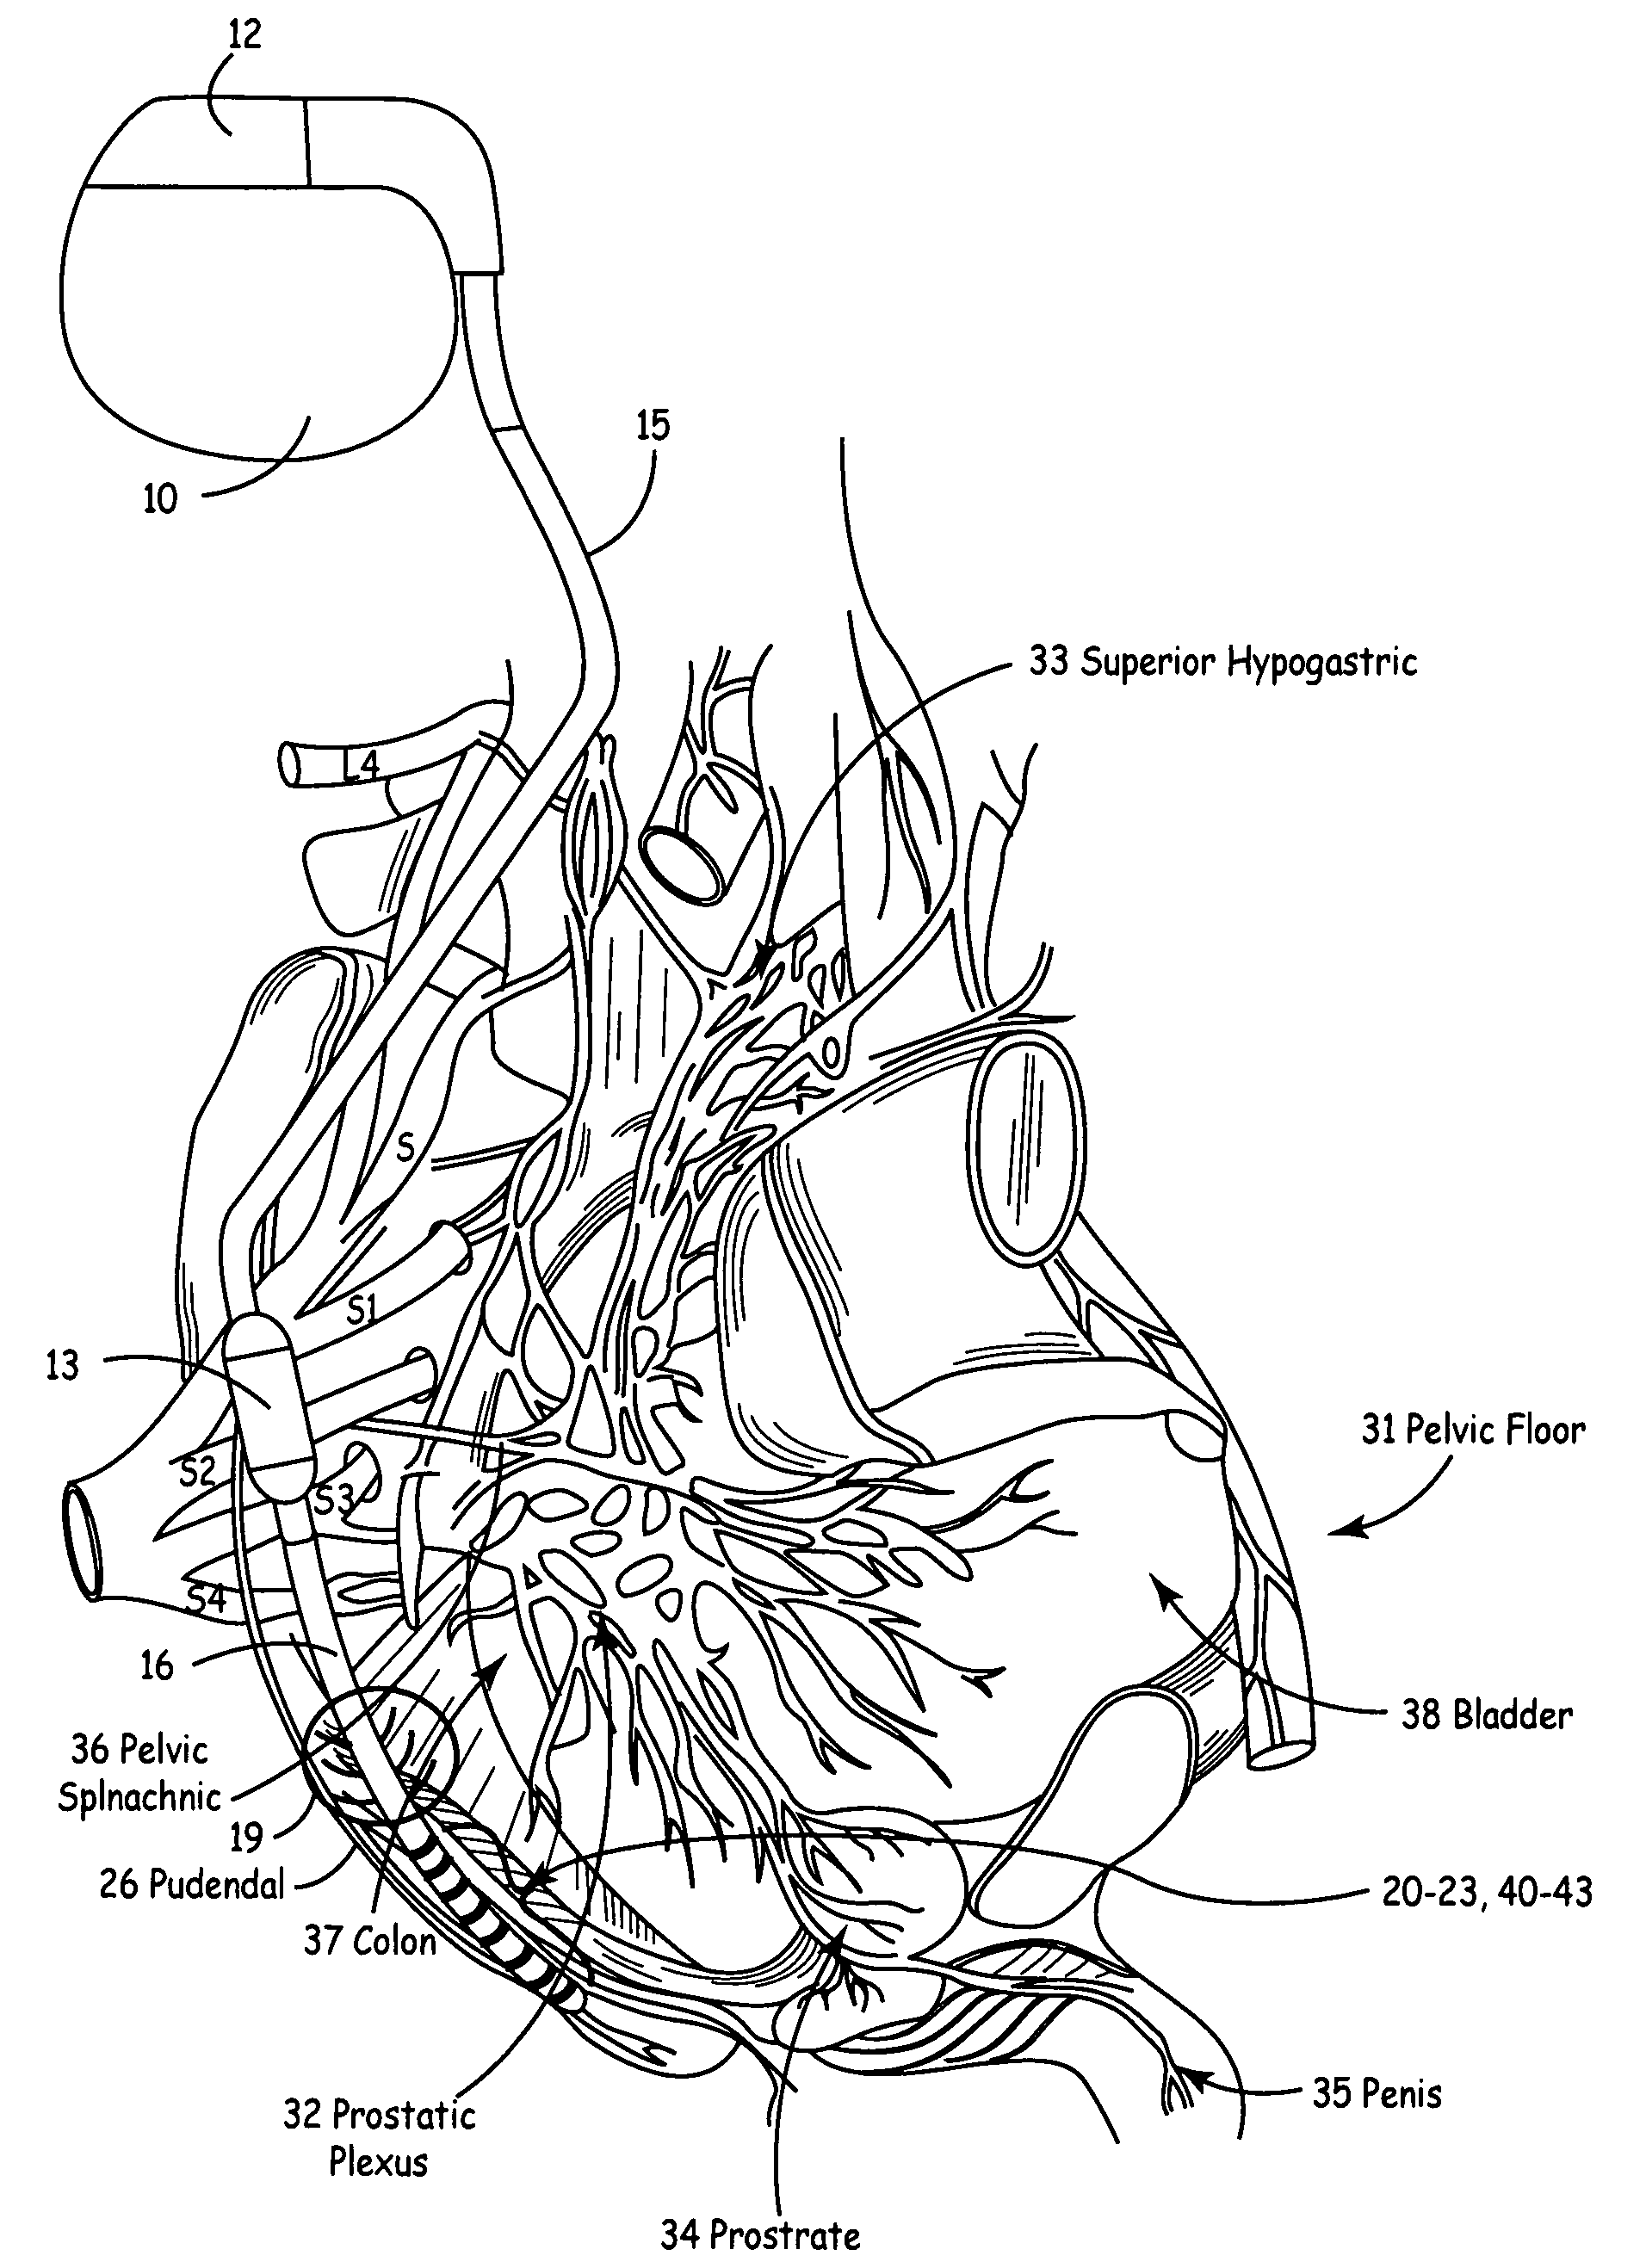 Method, system and device for treating disorders of the pelvic floor by means of electrical stimulation of the pudendal and associated nerves, and the optional delivery of drugs in association therewith